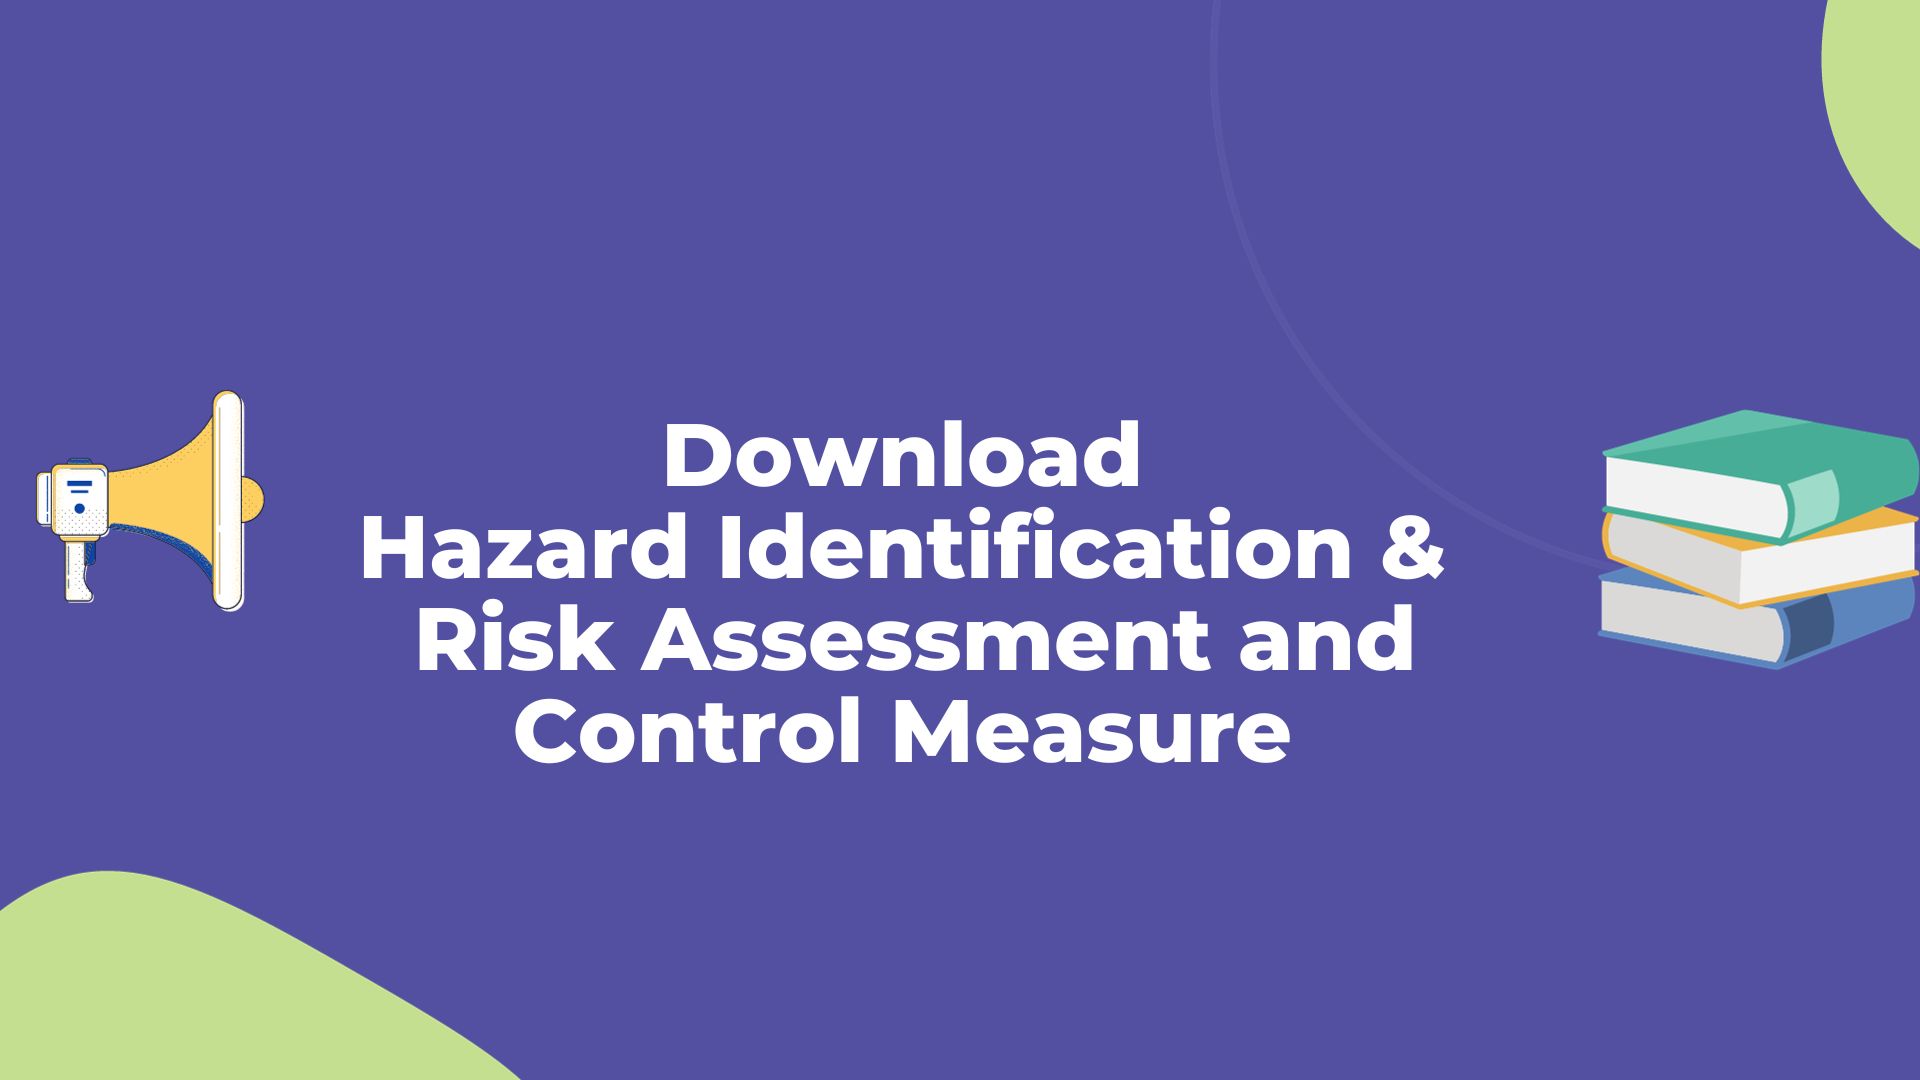 Download Hazard Identification & Risk Assessment and Control Measure 